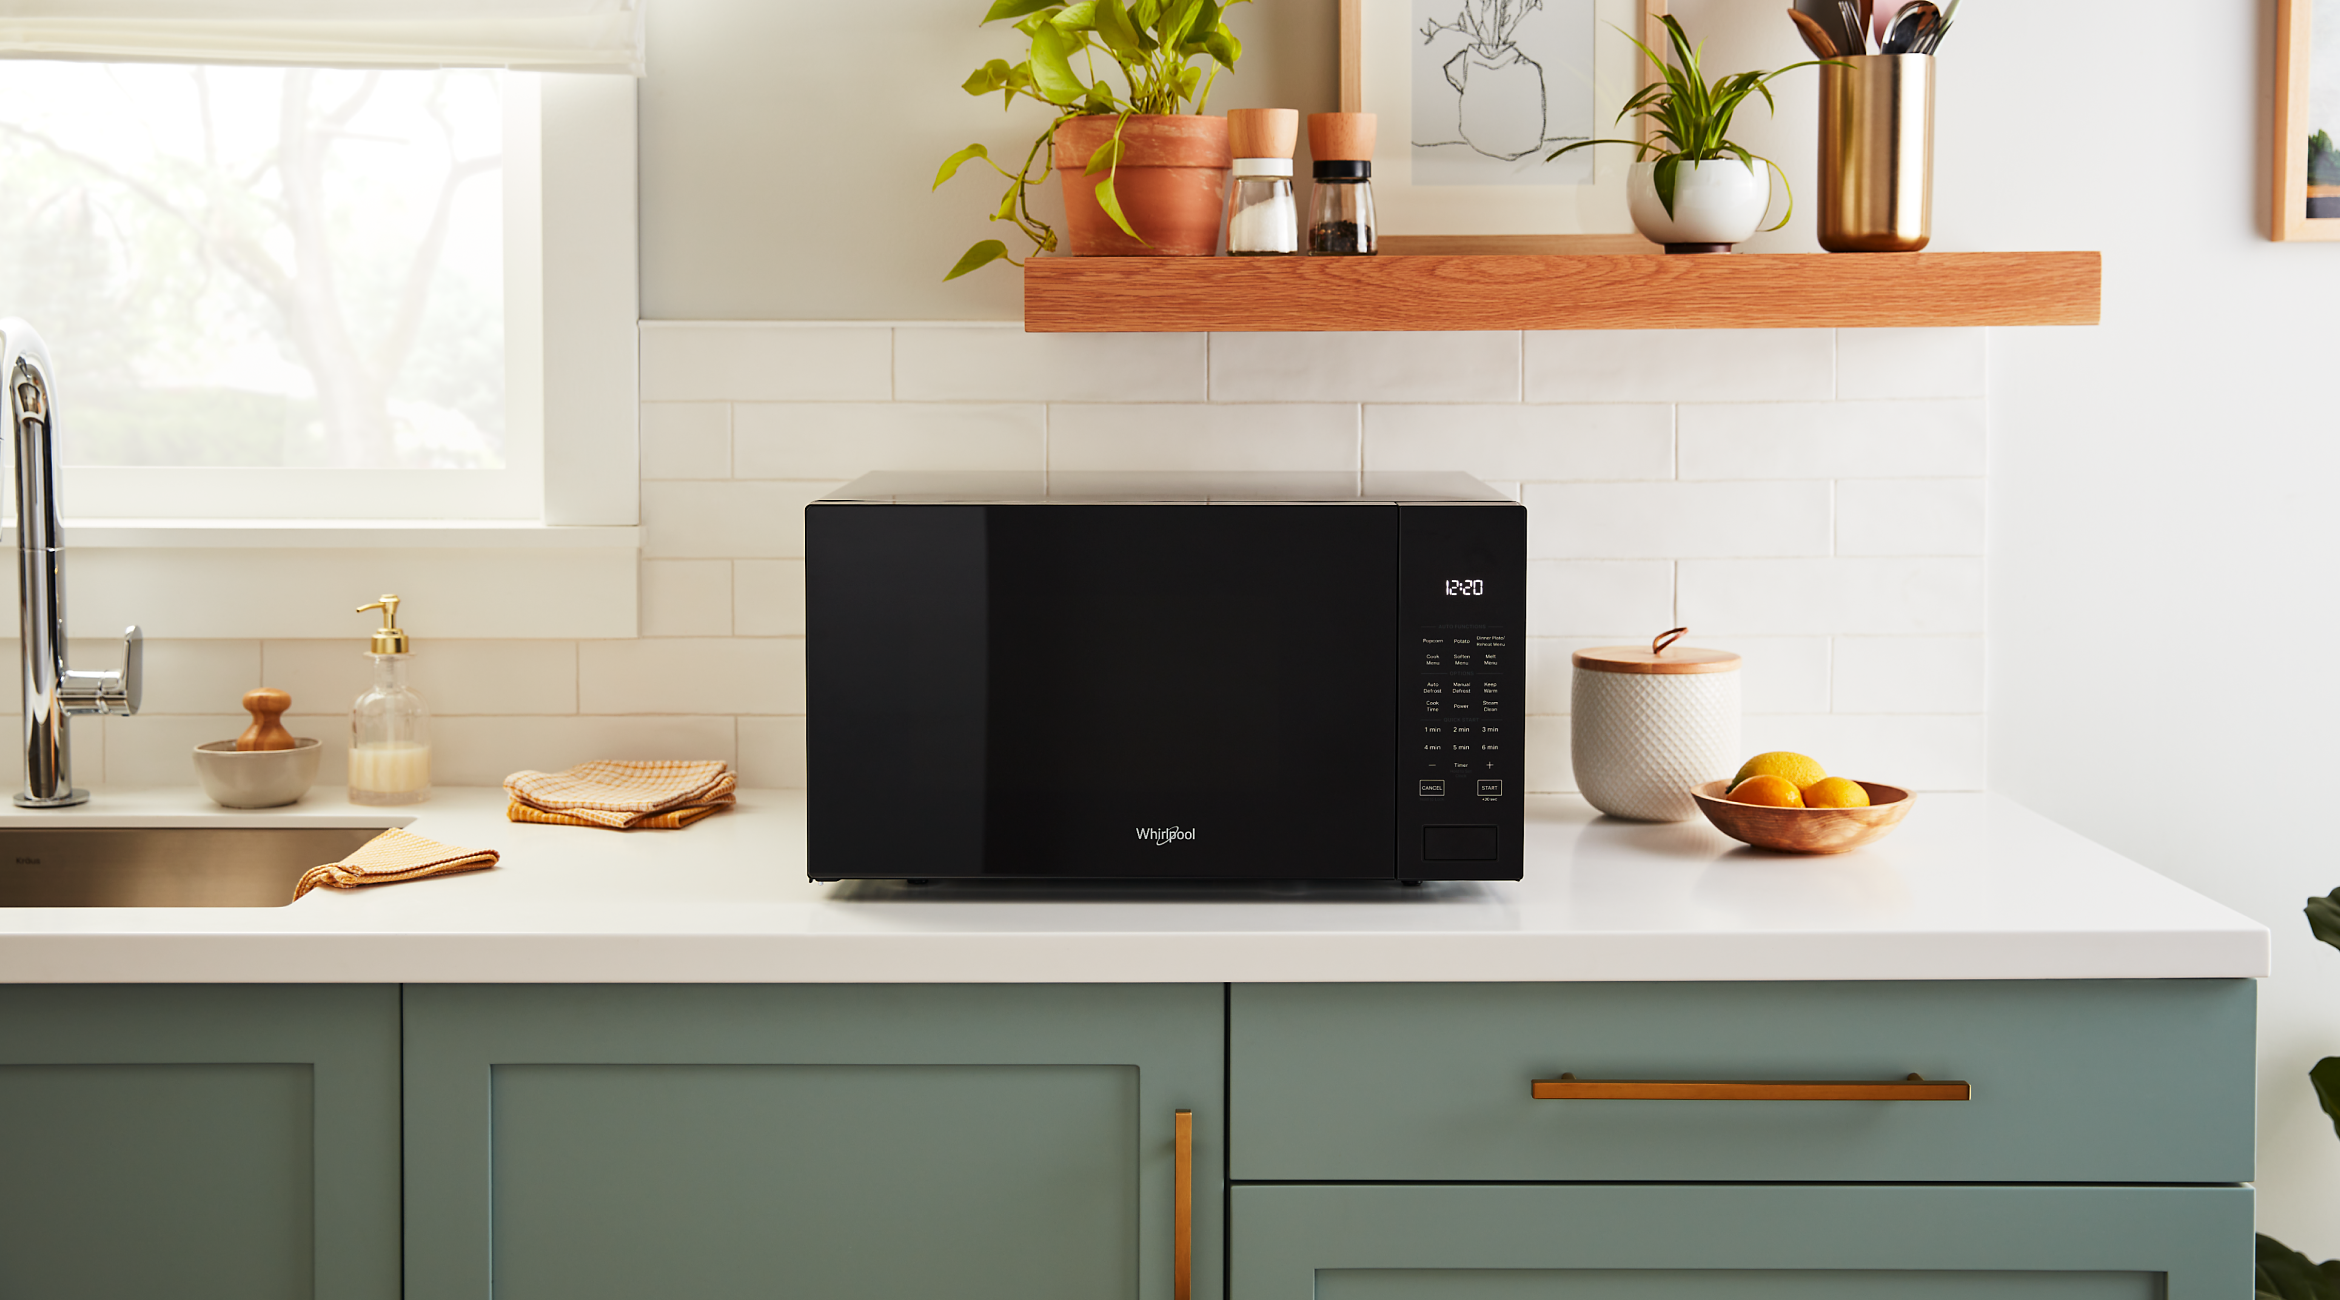 A Whirlpool® Microwave sits on the counter